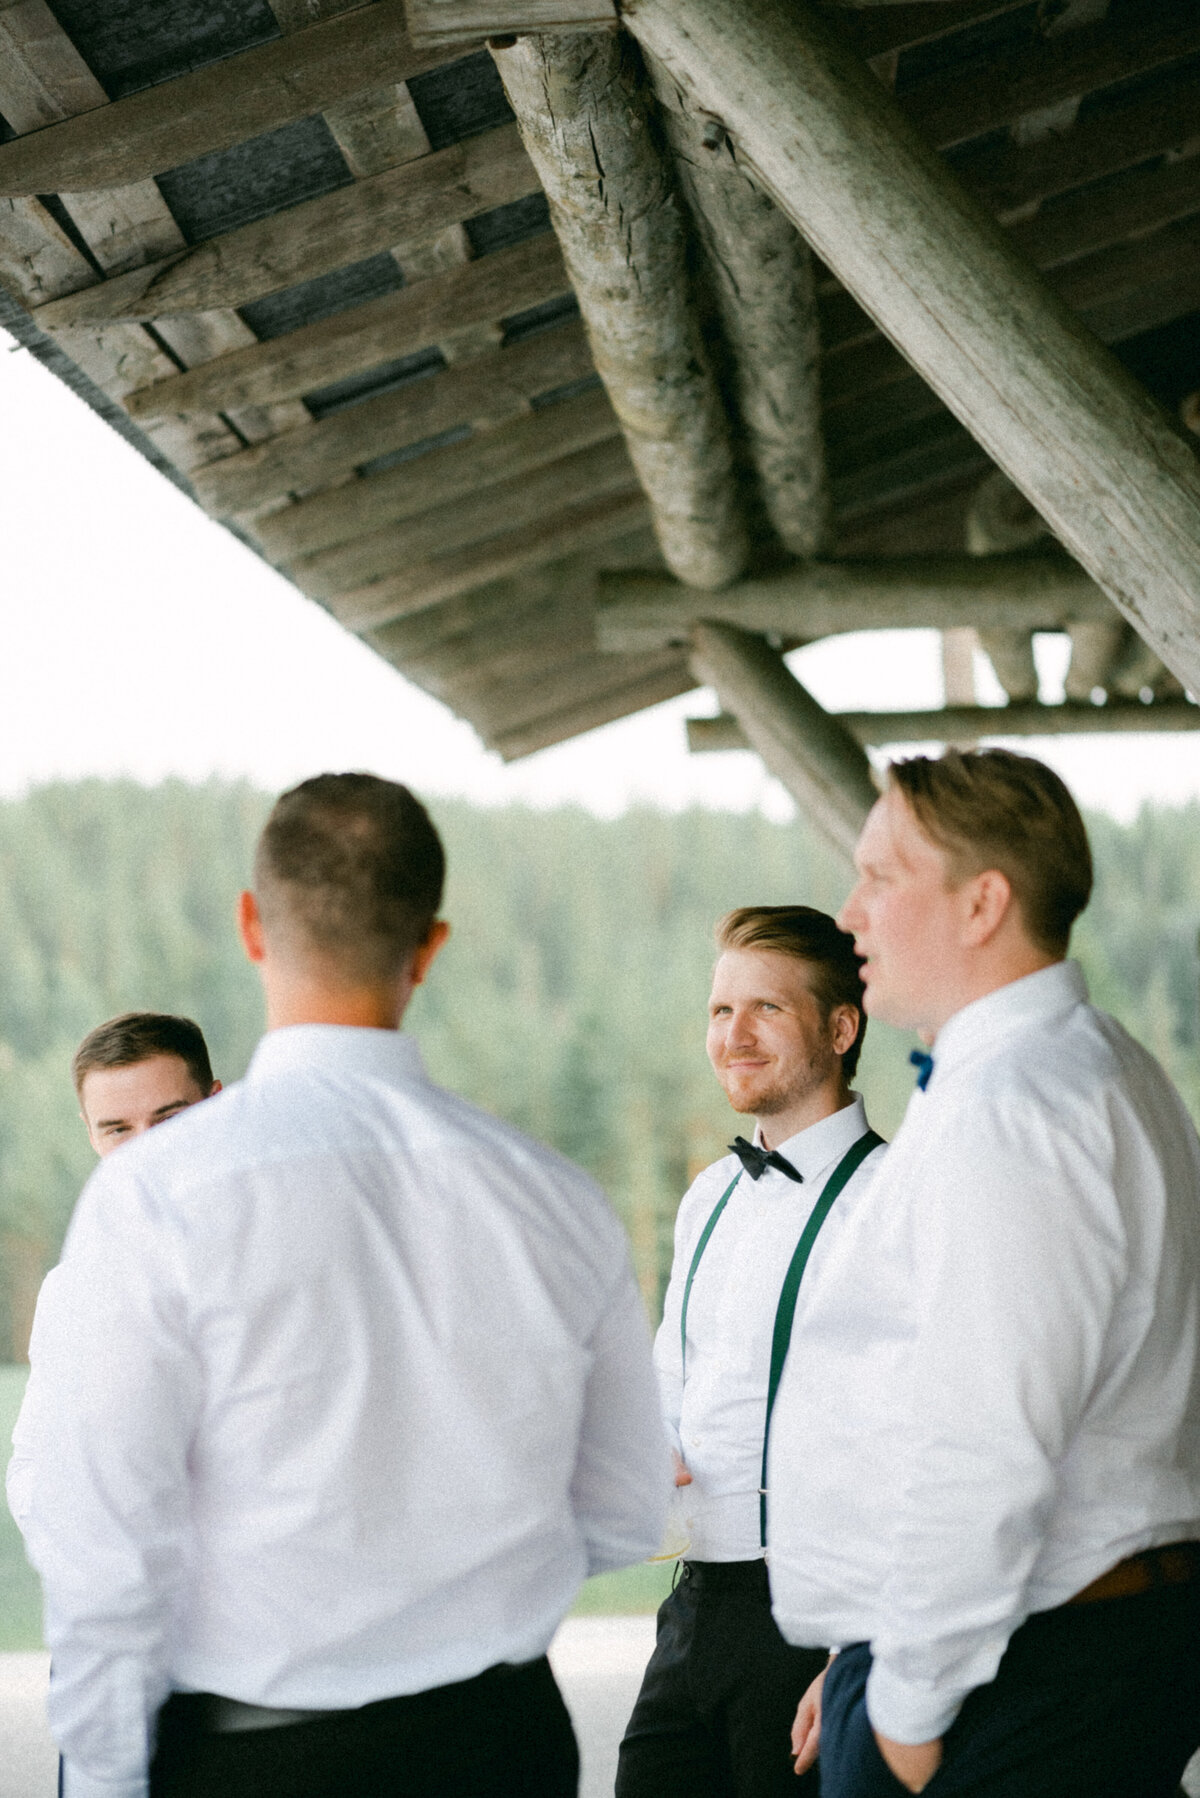 The groom with his friends guests in the wedding in an image captured by wedding photographer Hannika Gabrielsson.